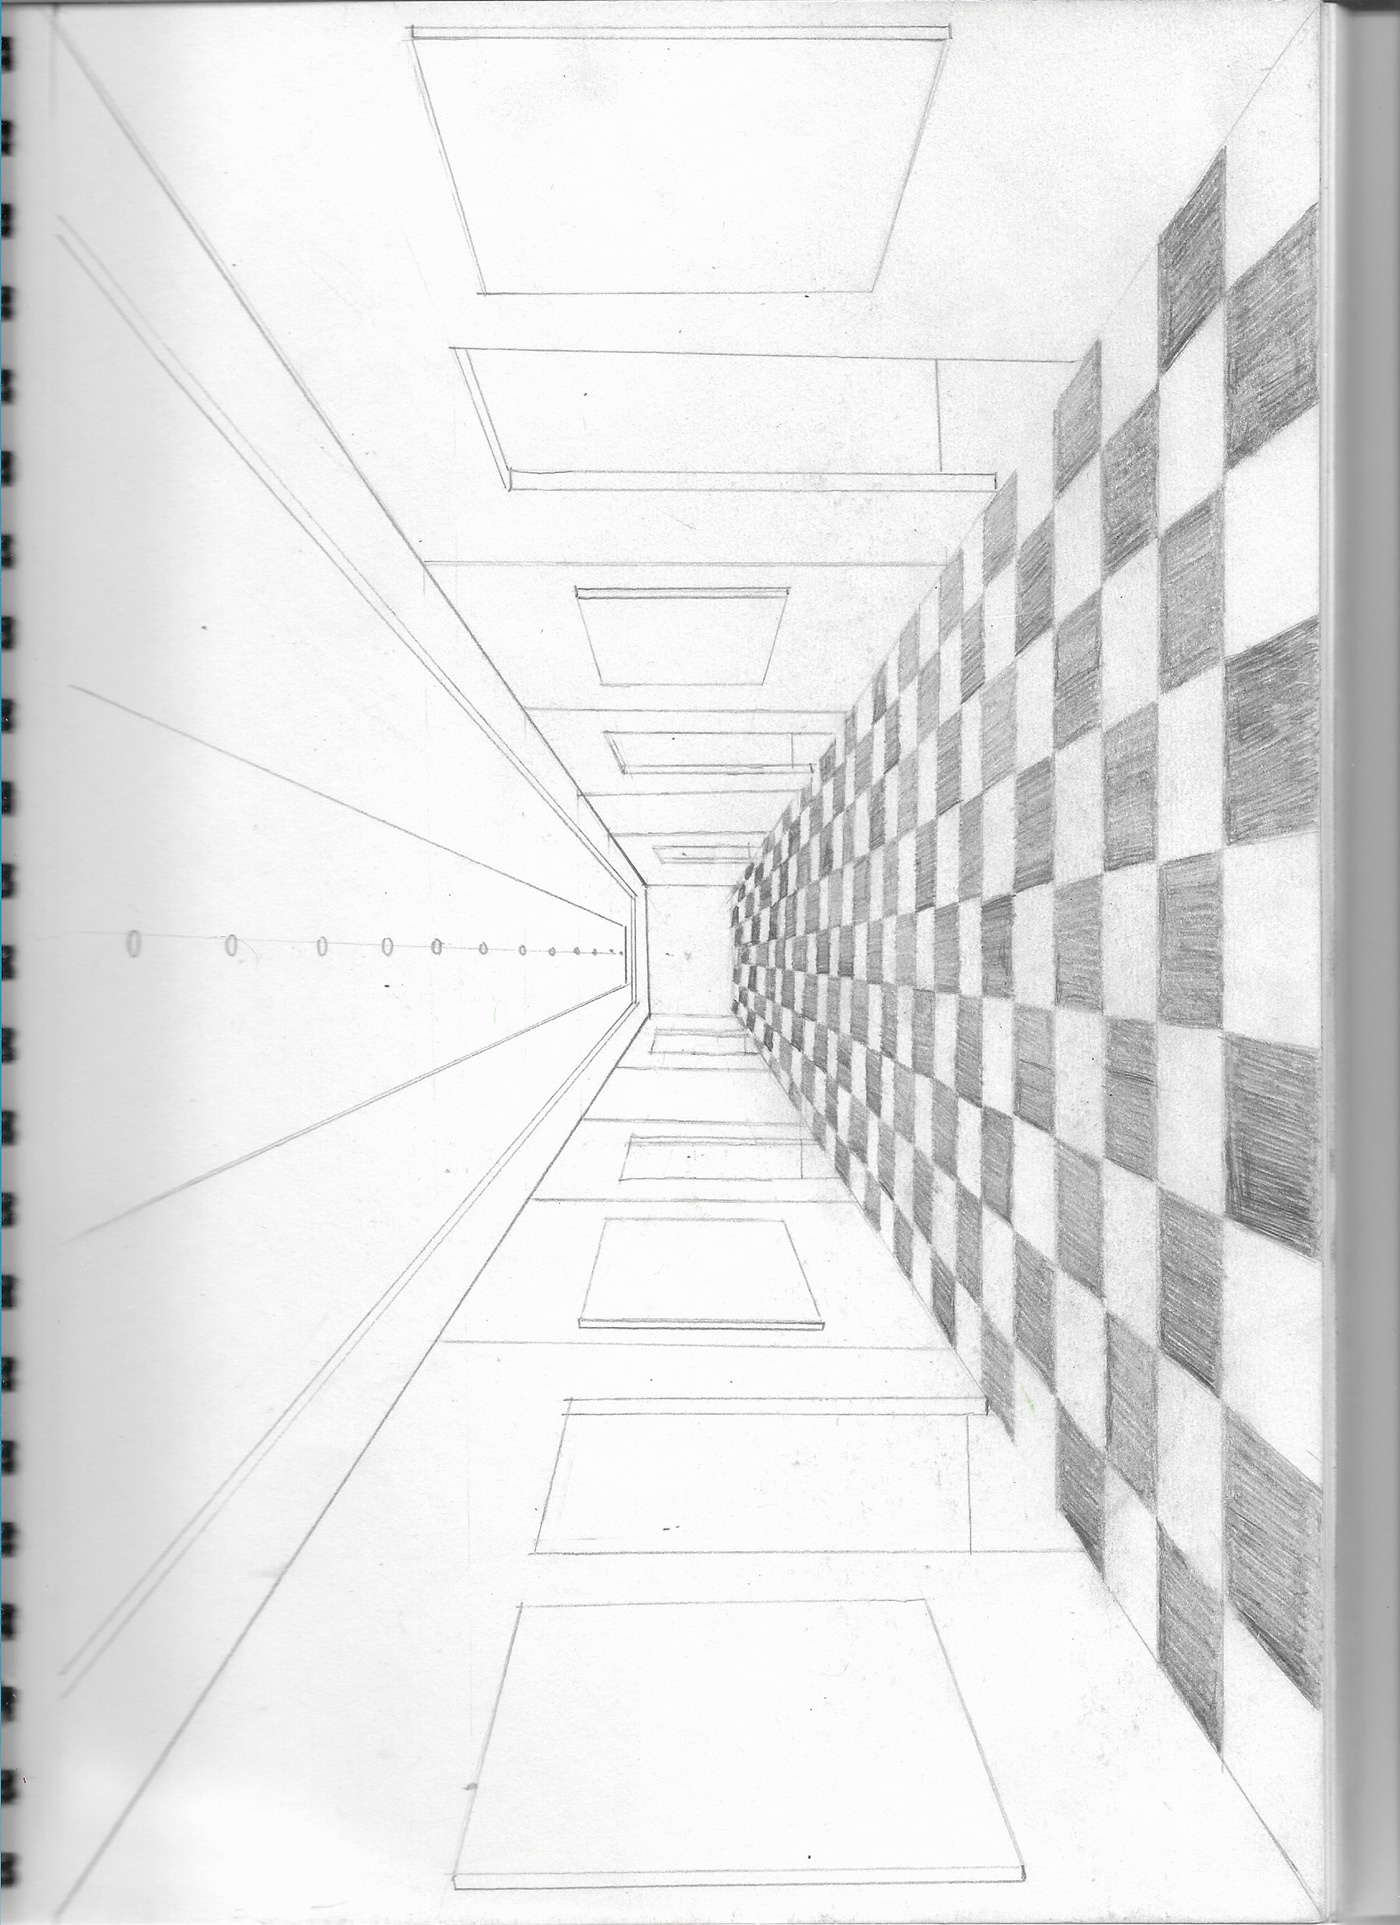 3d perspective view of a hallway in a building